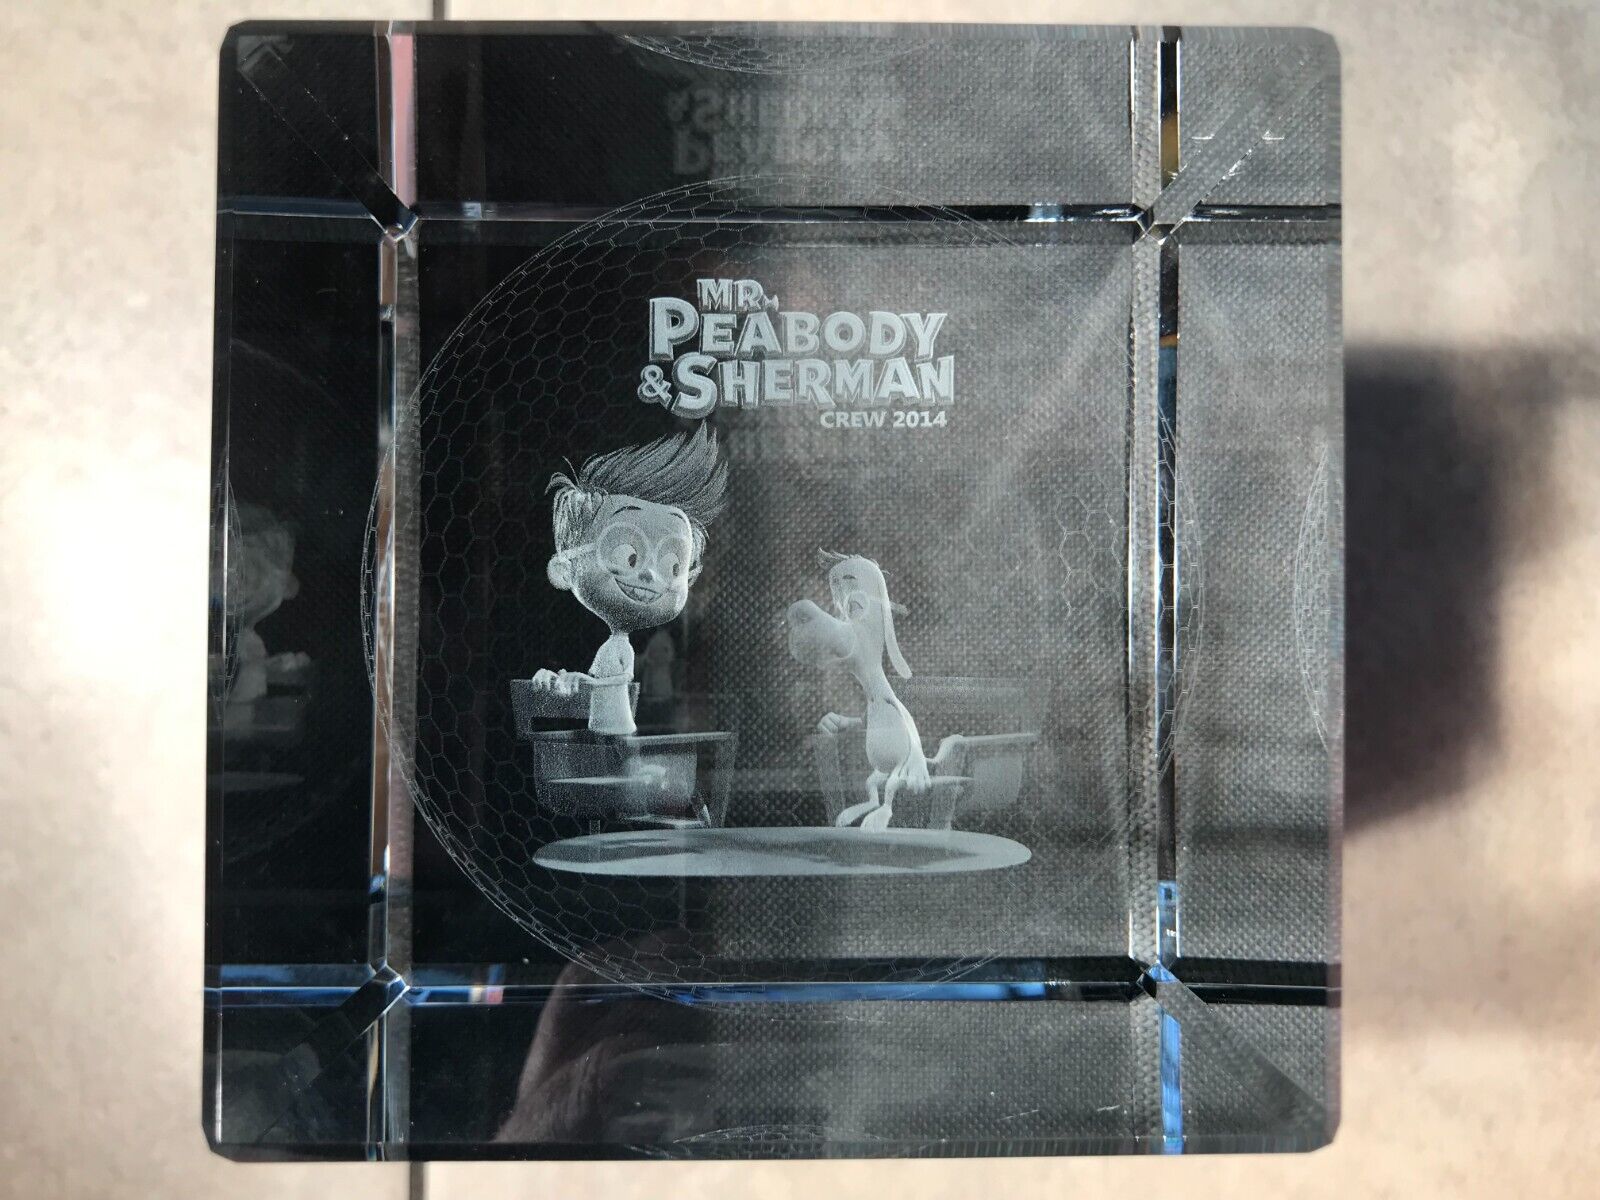 DreamWorks Animation Mr. Peabody & Sherman 3D Crystal Cube Paperweight VERY RARE